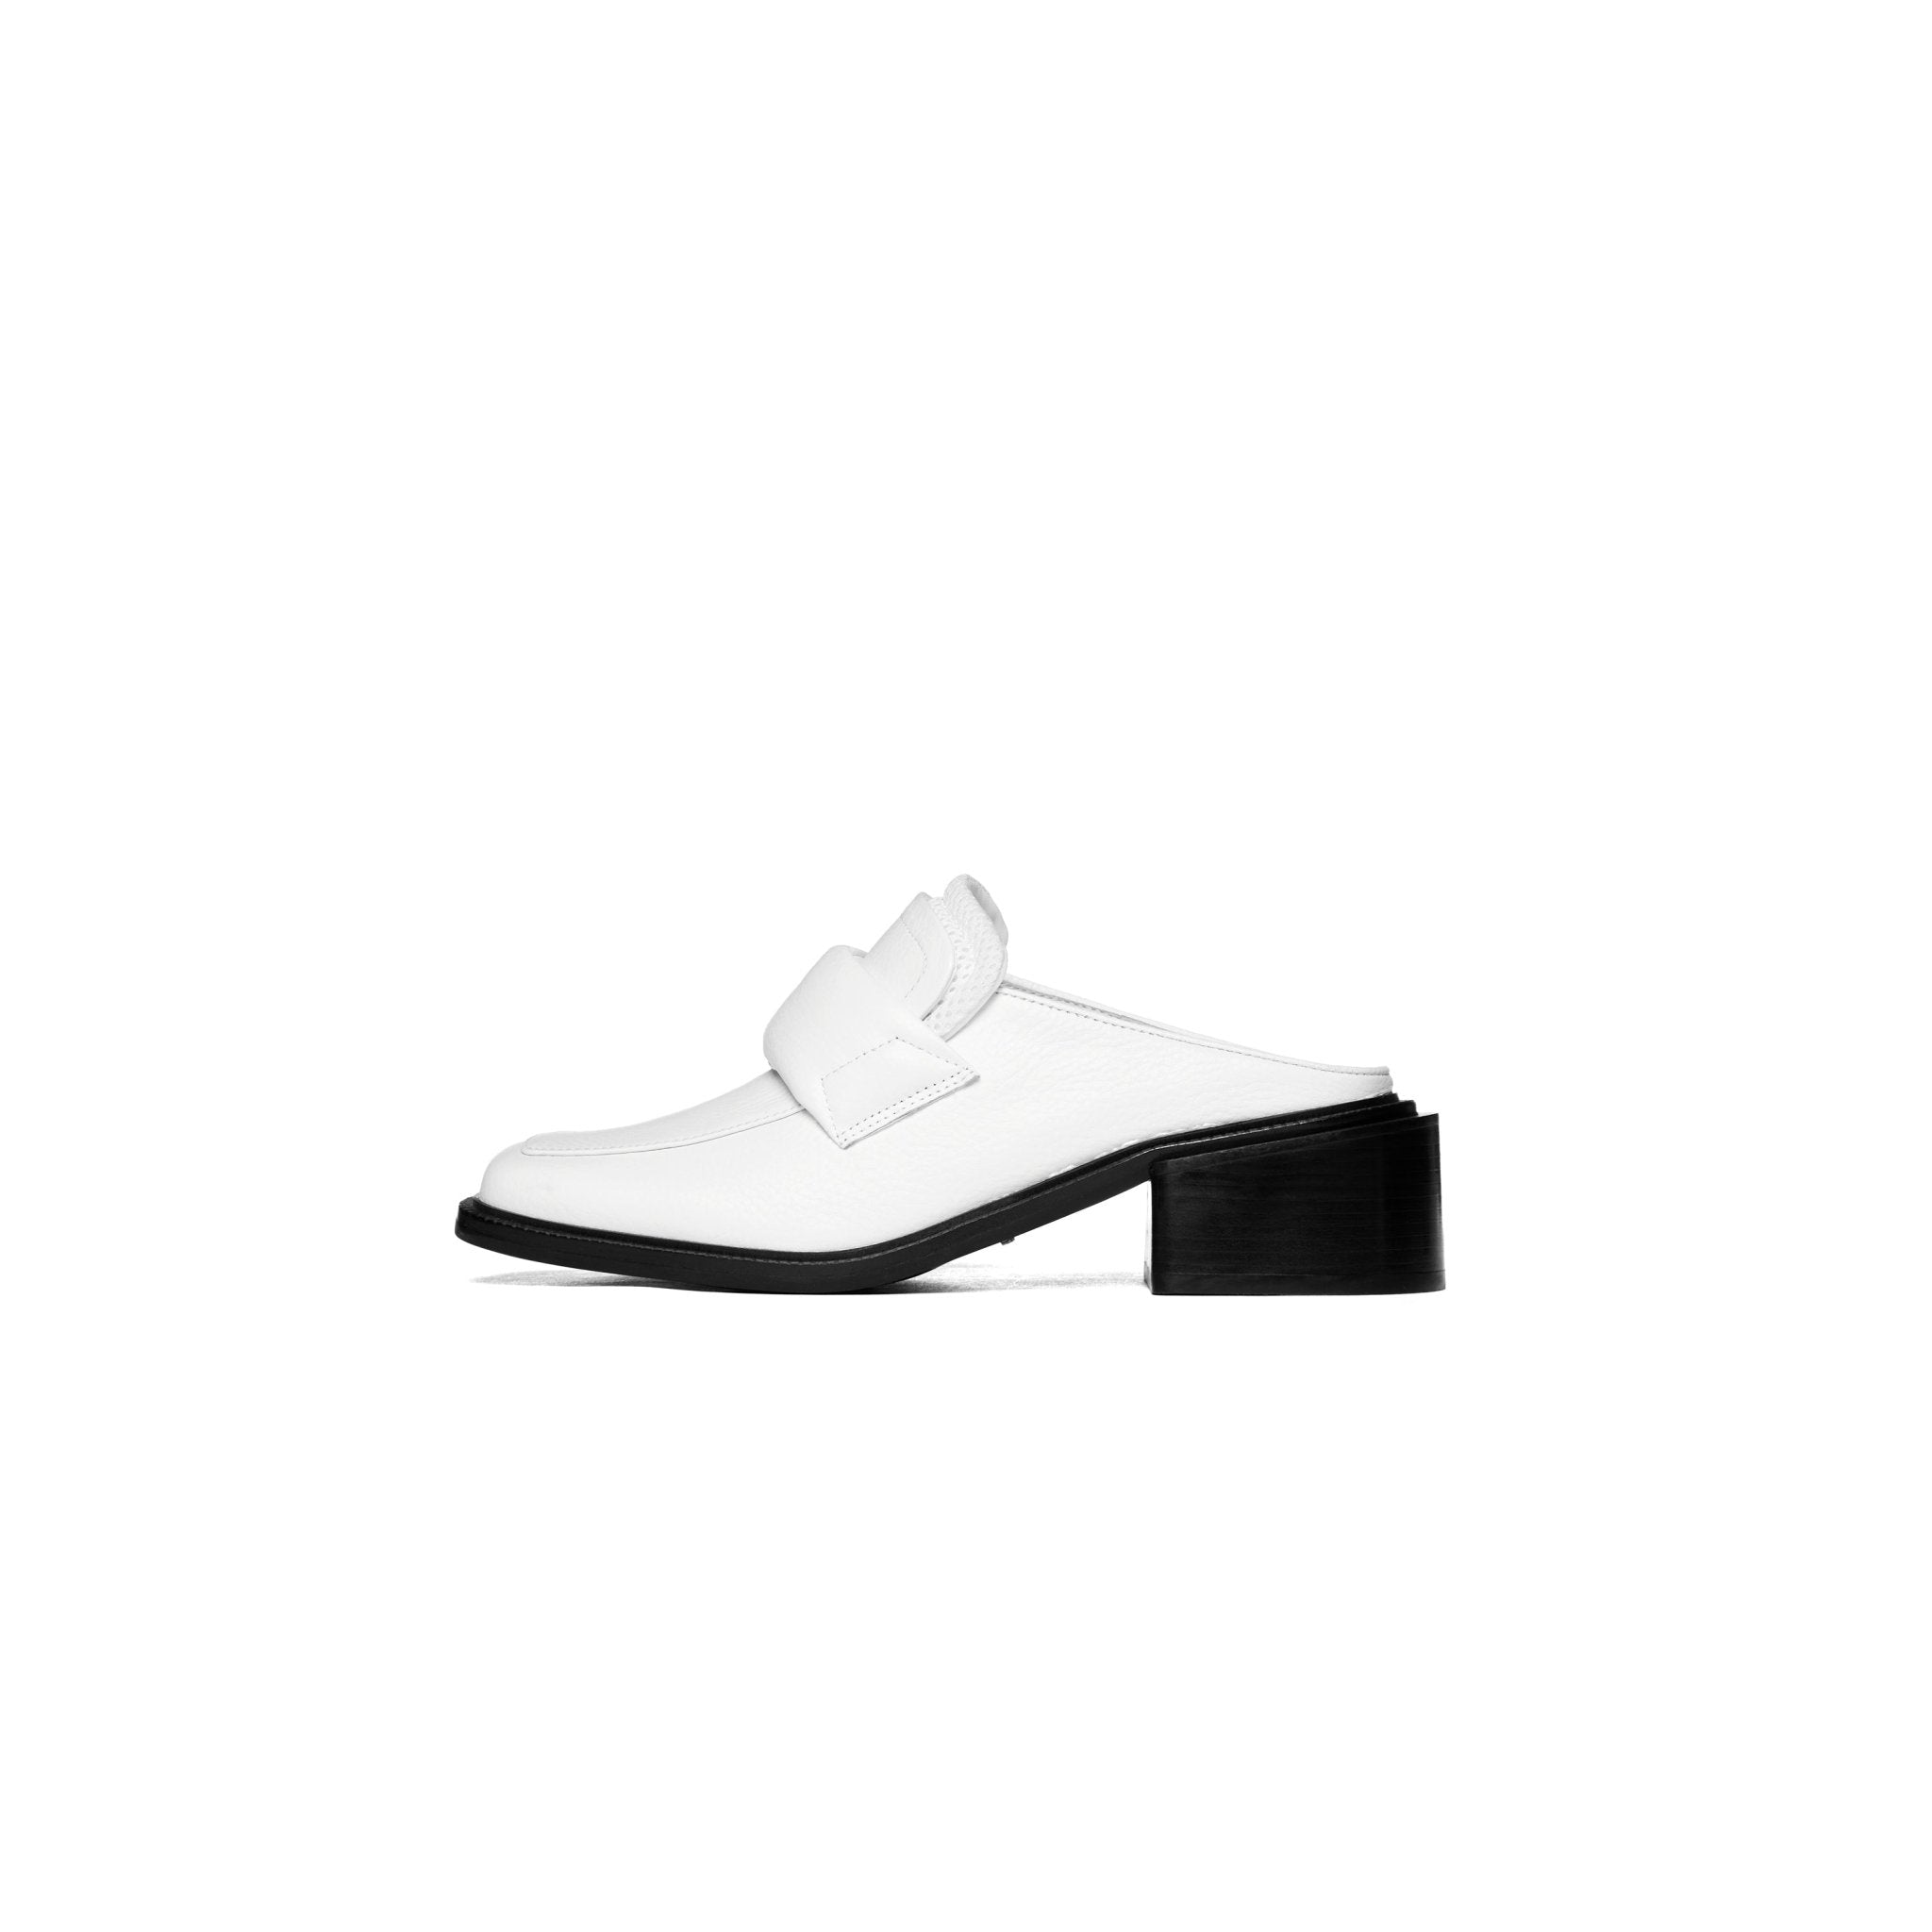 LOST IN ECHO White Double Tongue Padded Vamp Sports Elements Loafer Slippers | MADA IN CHINA